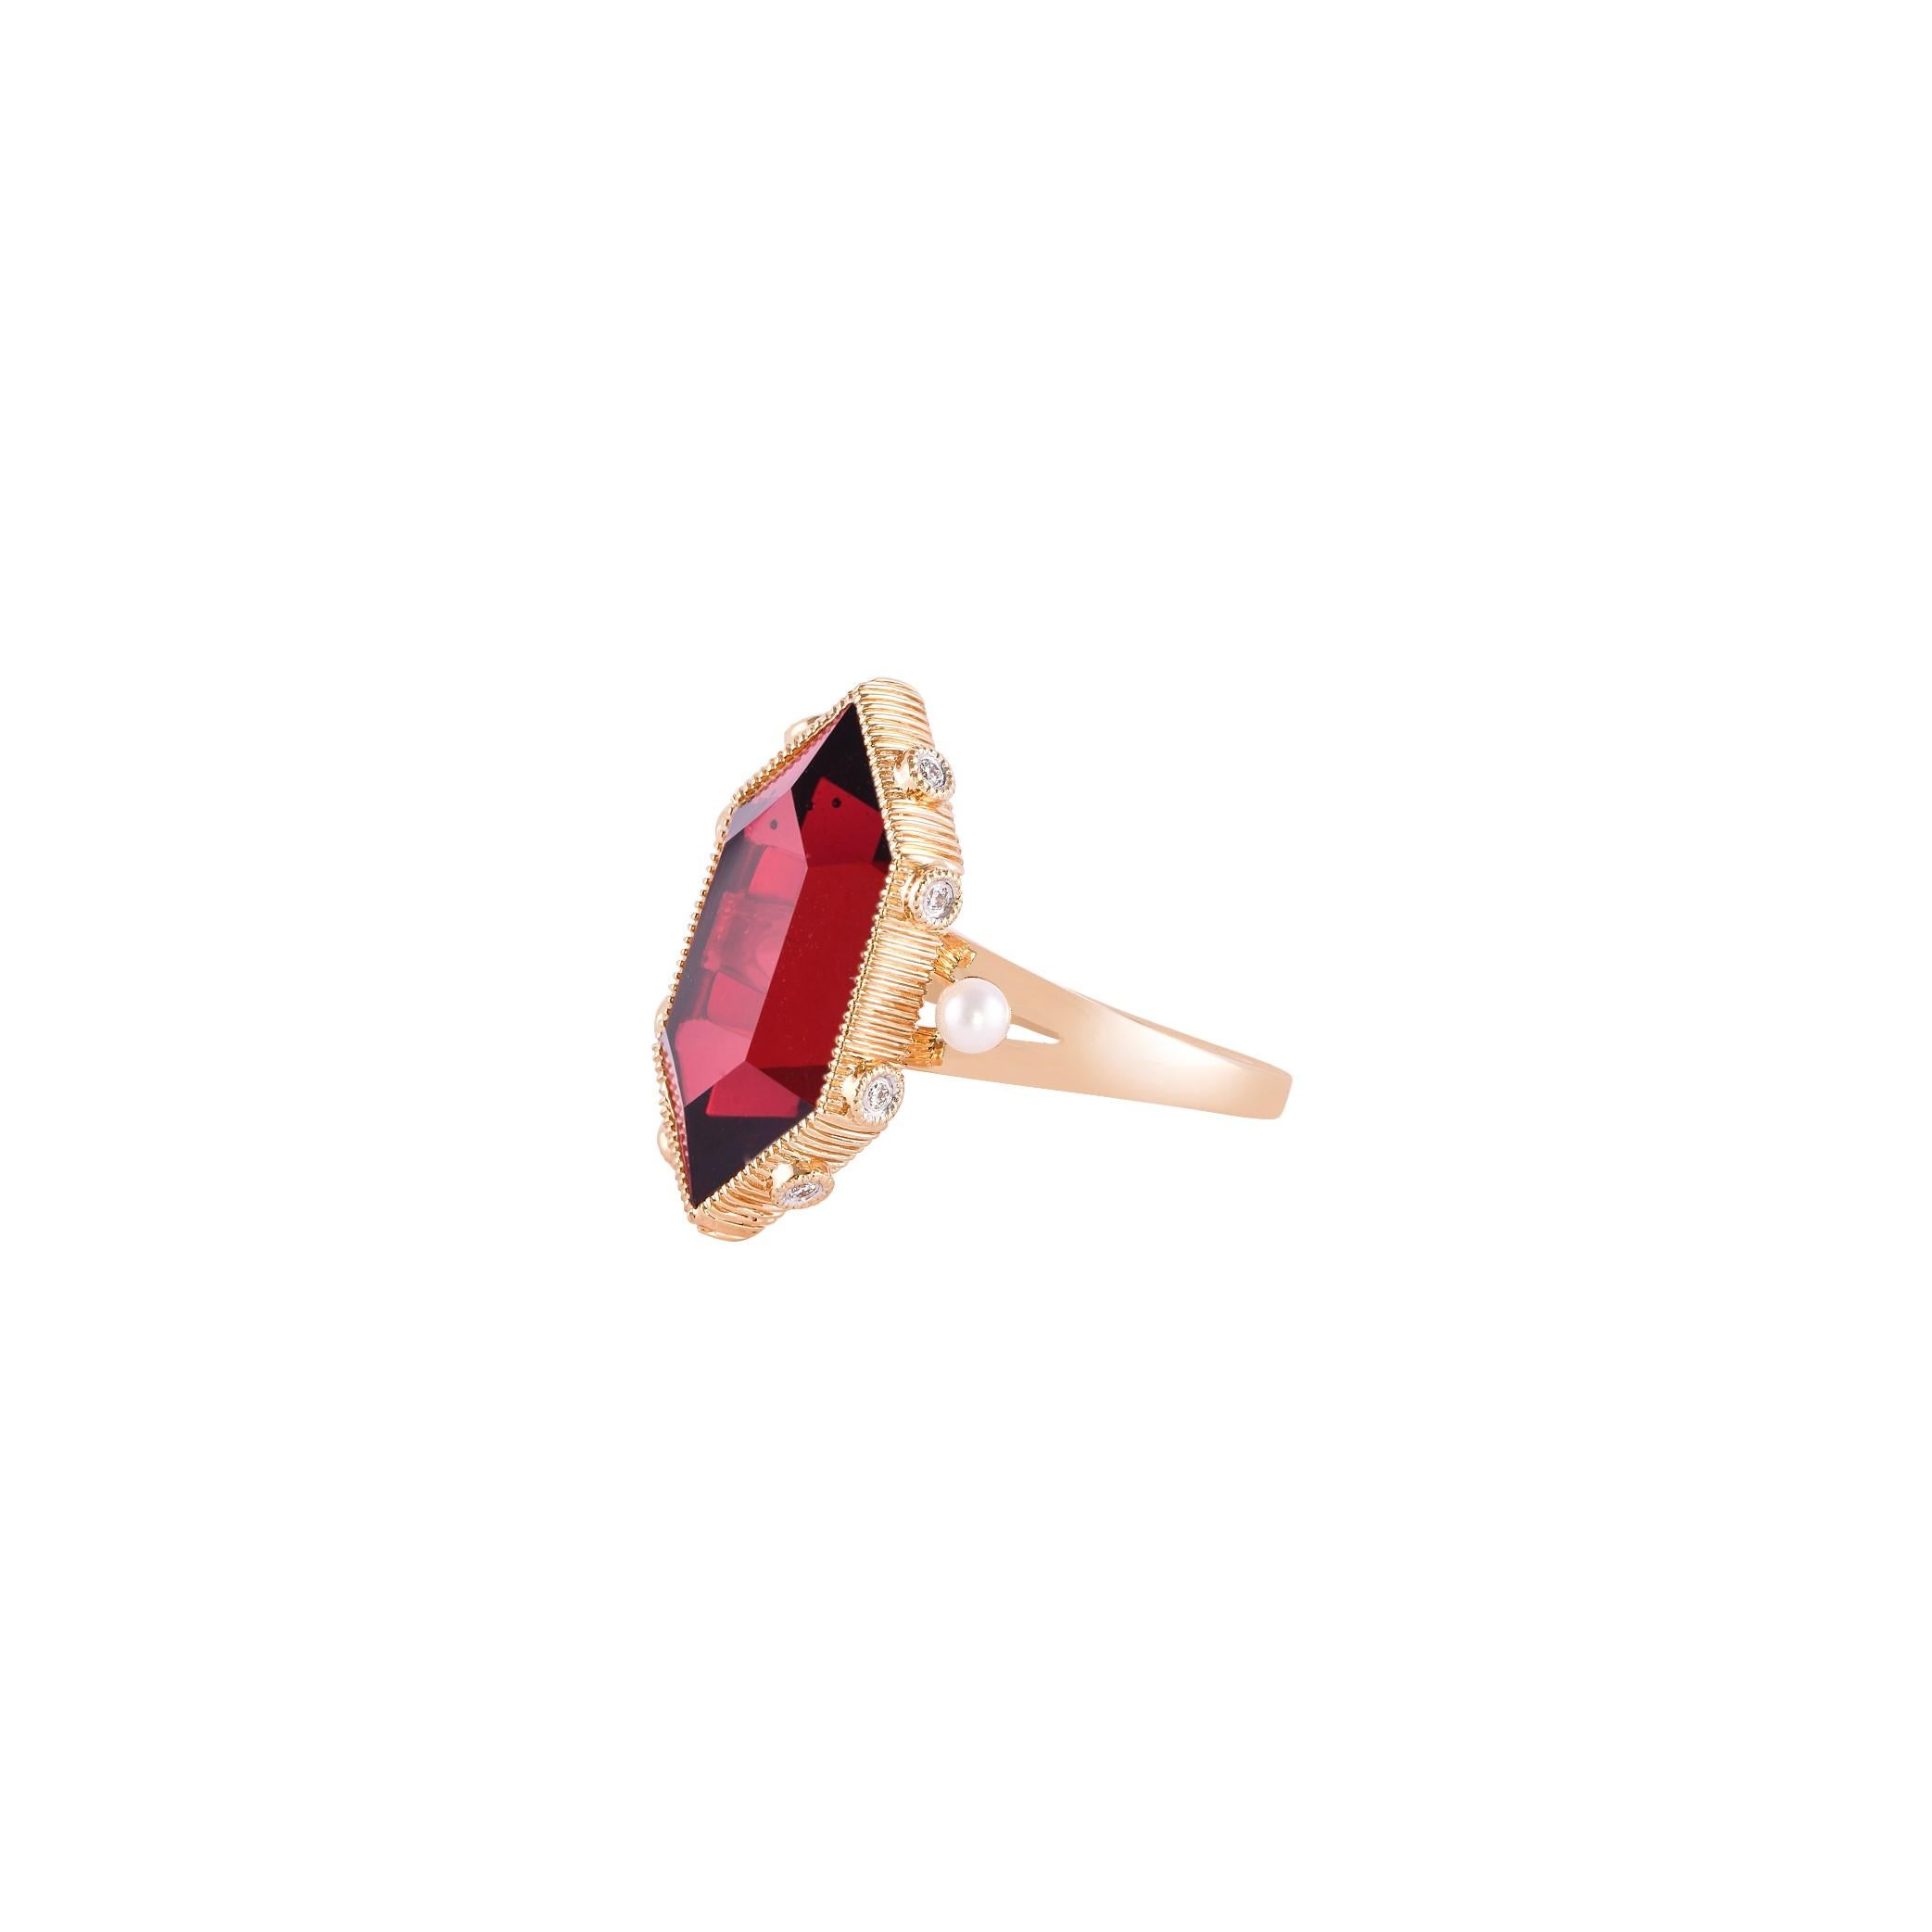 Contemporary 11.85 Carat Red Garnet Ring in 18 Karat Rose Gold with Diamonds and Pearls For Sale